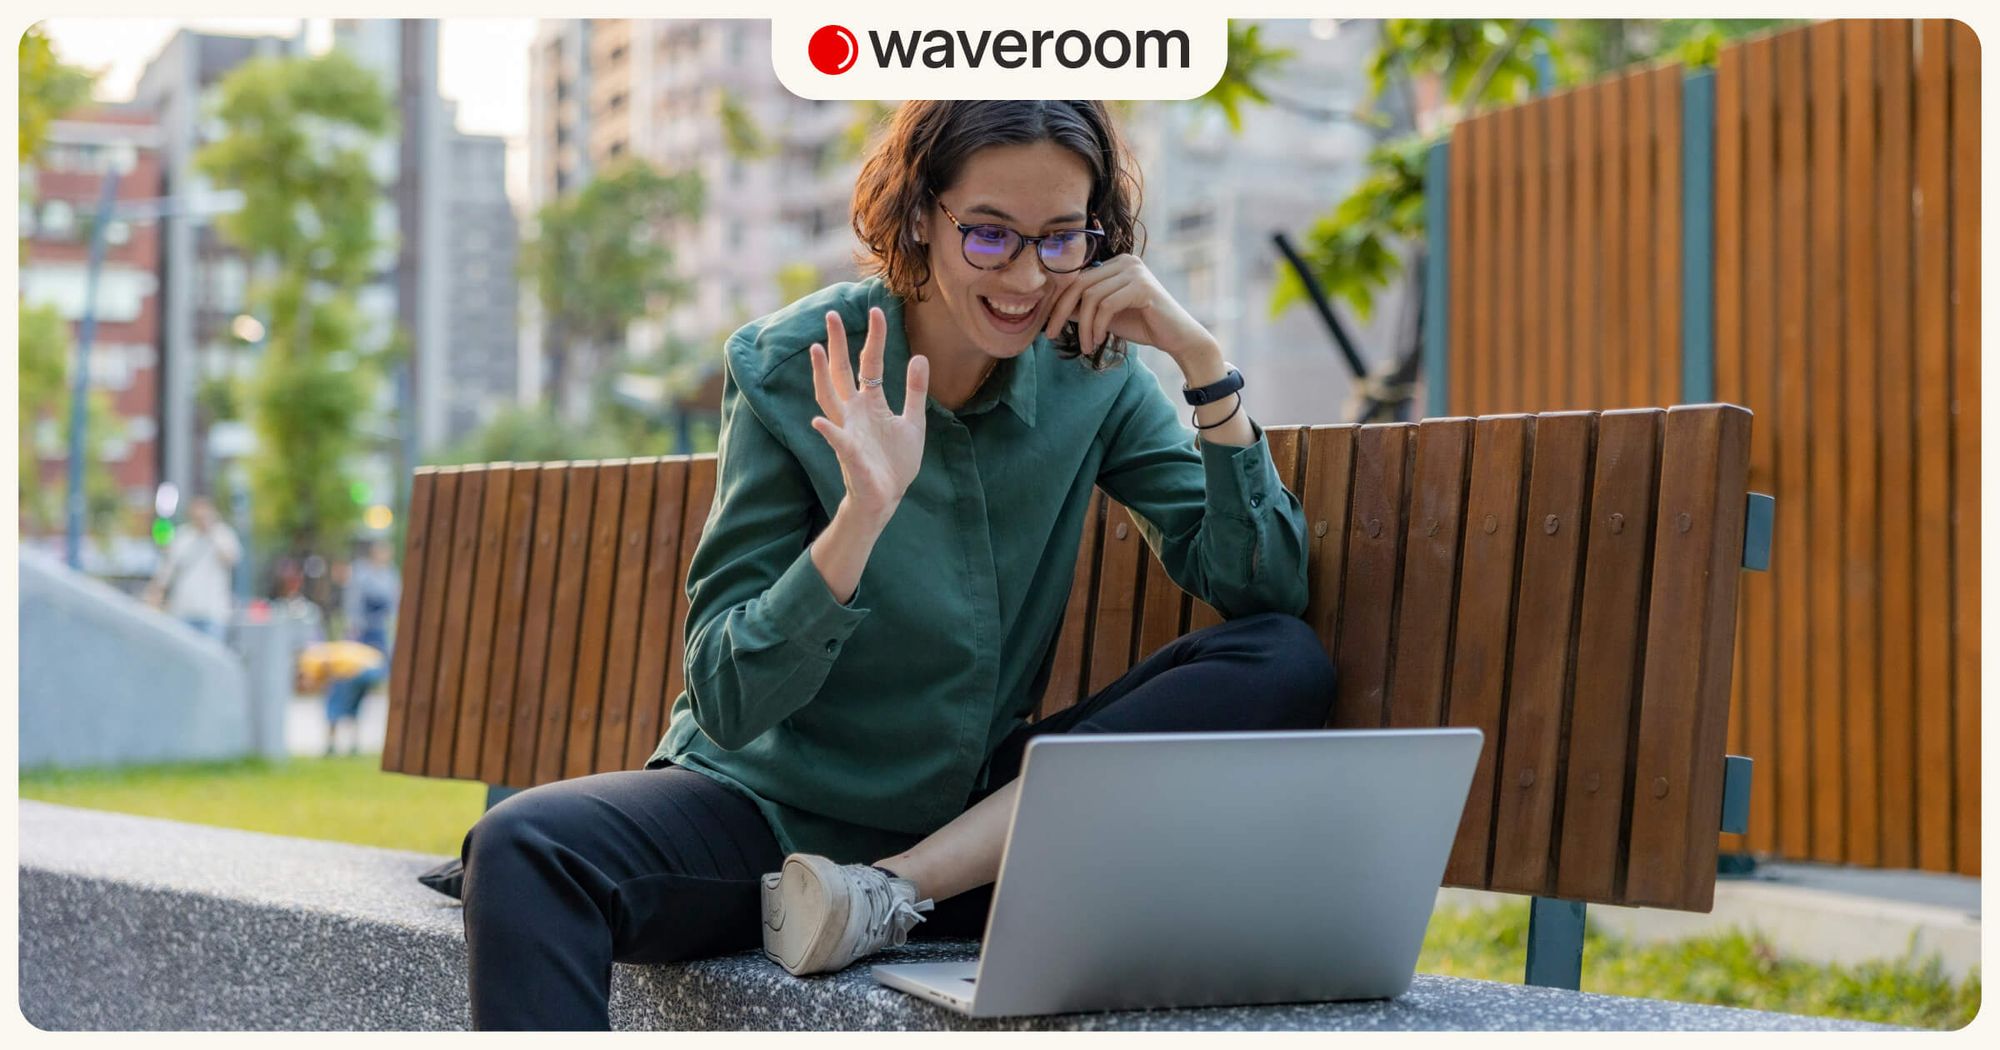 Google Meet Doesn't Offer It: How to Have an HQ Meeting with Waveroom